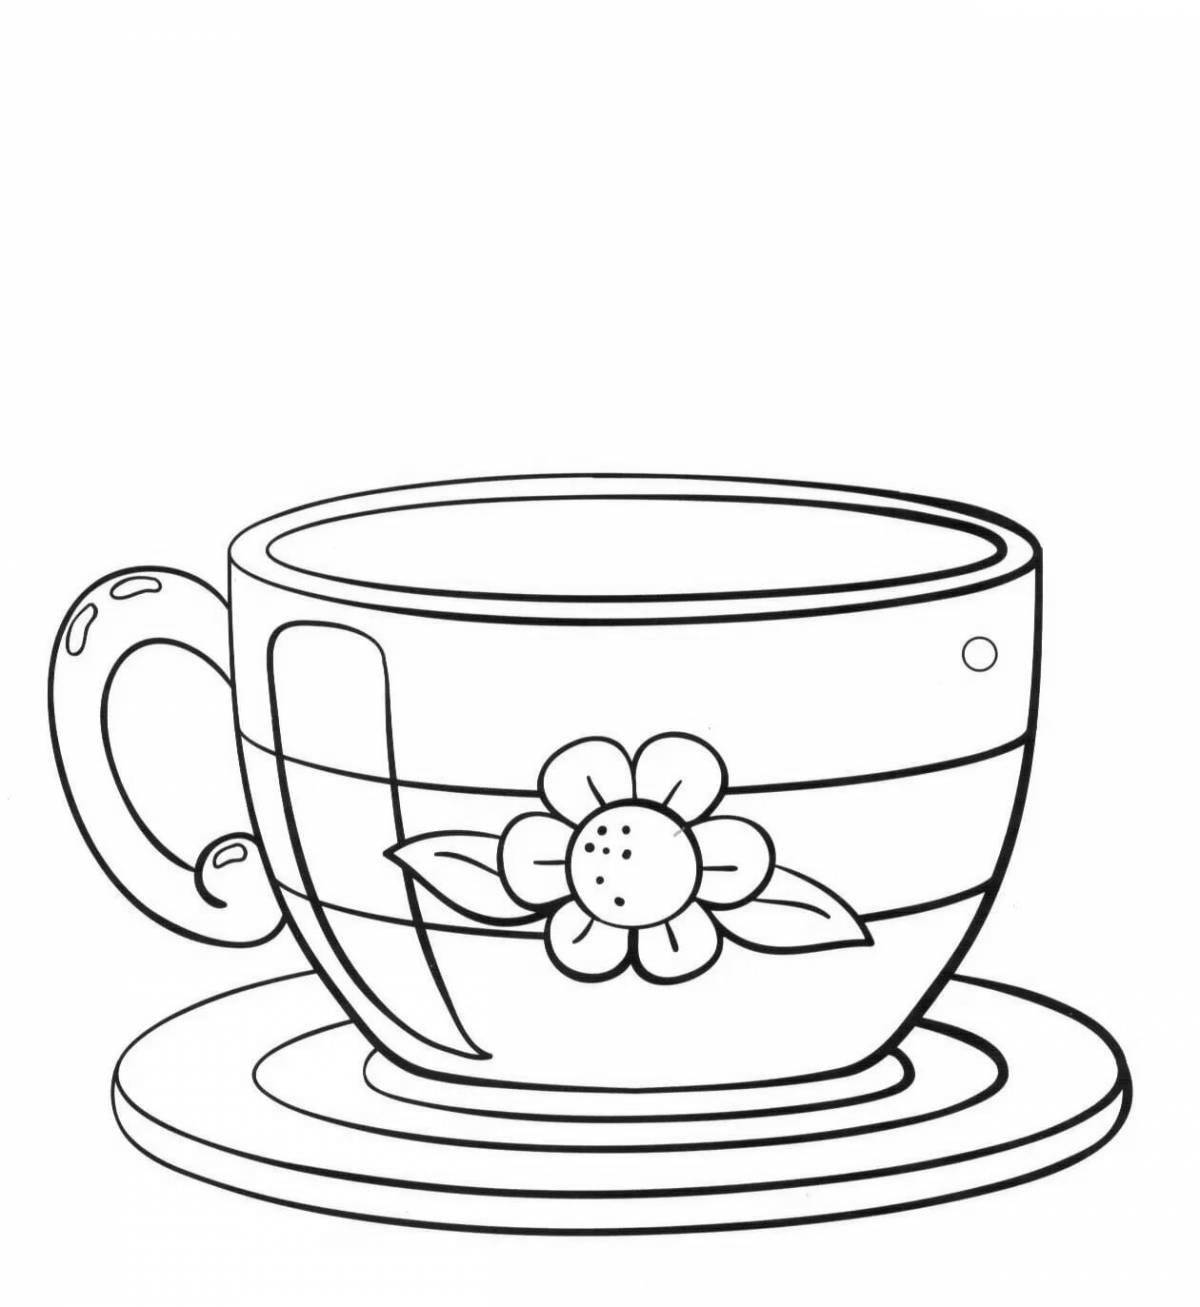 Fun coloring cup for kids